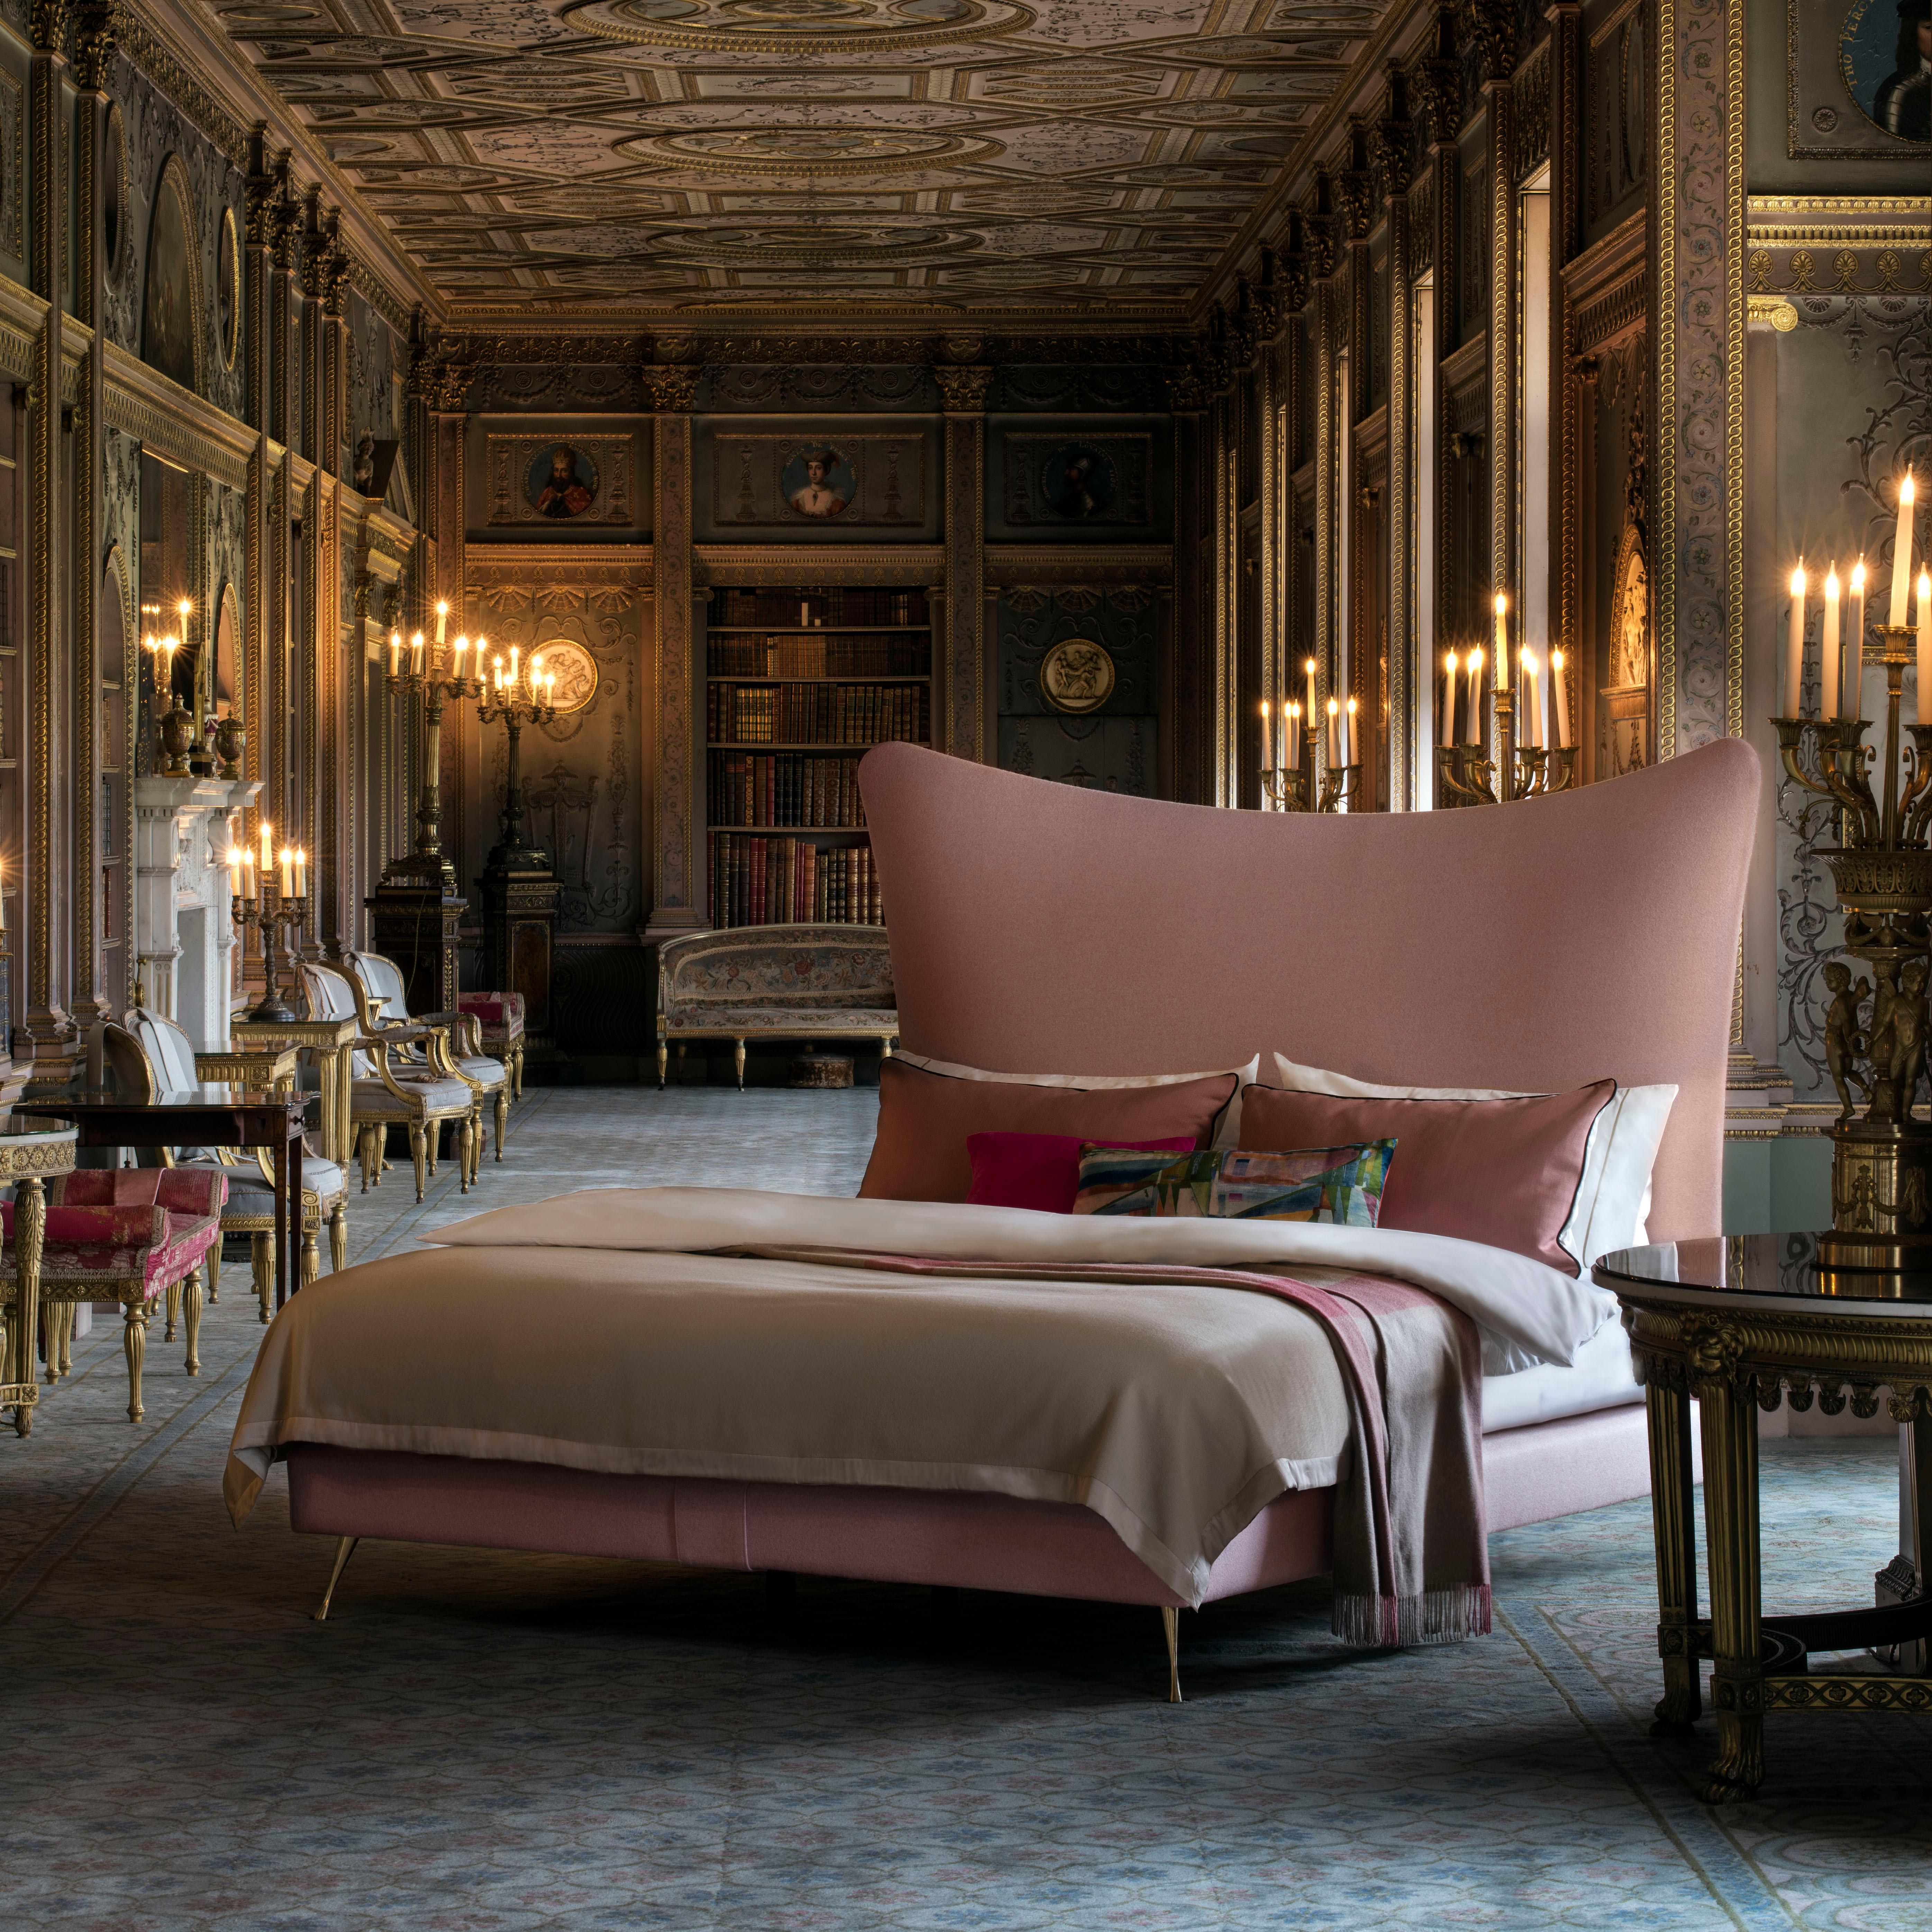 A classic Savoir house design, the soft curves of the Amelia creates a very modern bed design. The headboard silhouette and indulgent pink colourway radiate femininity. Skilfully handcrafted in Savoir's London Bedworks, the Amelia headboard and base